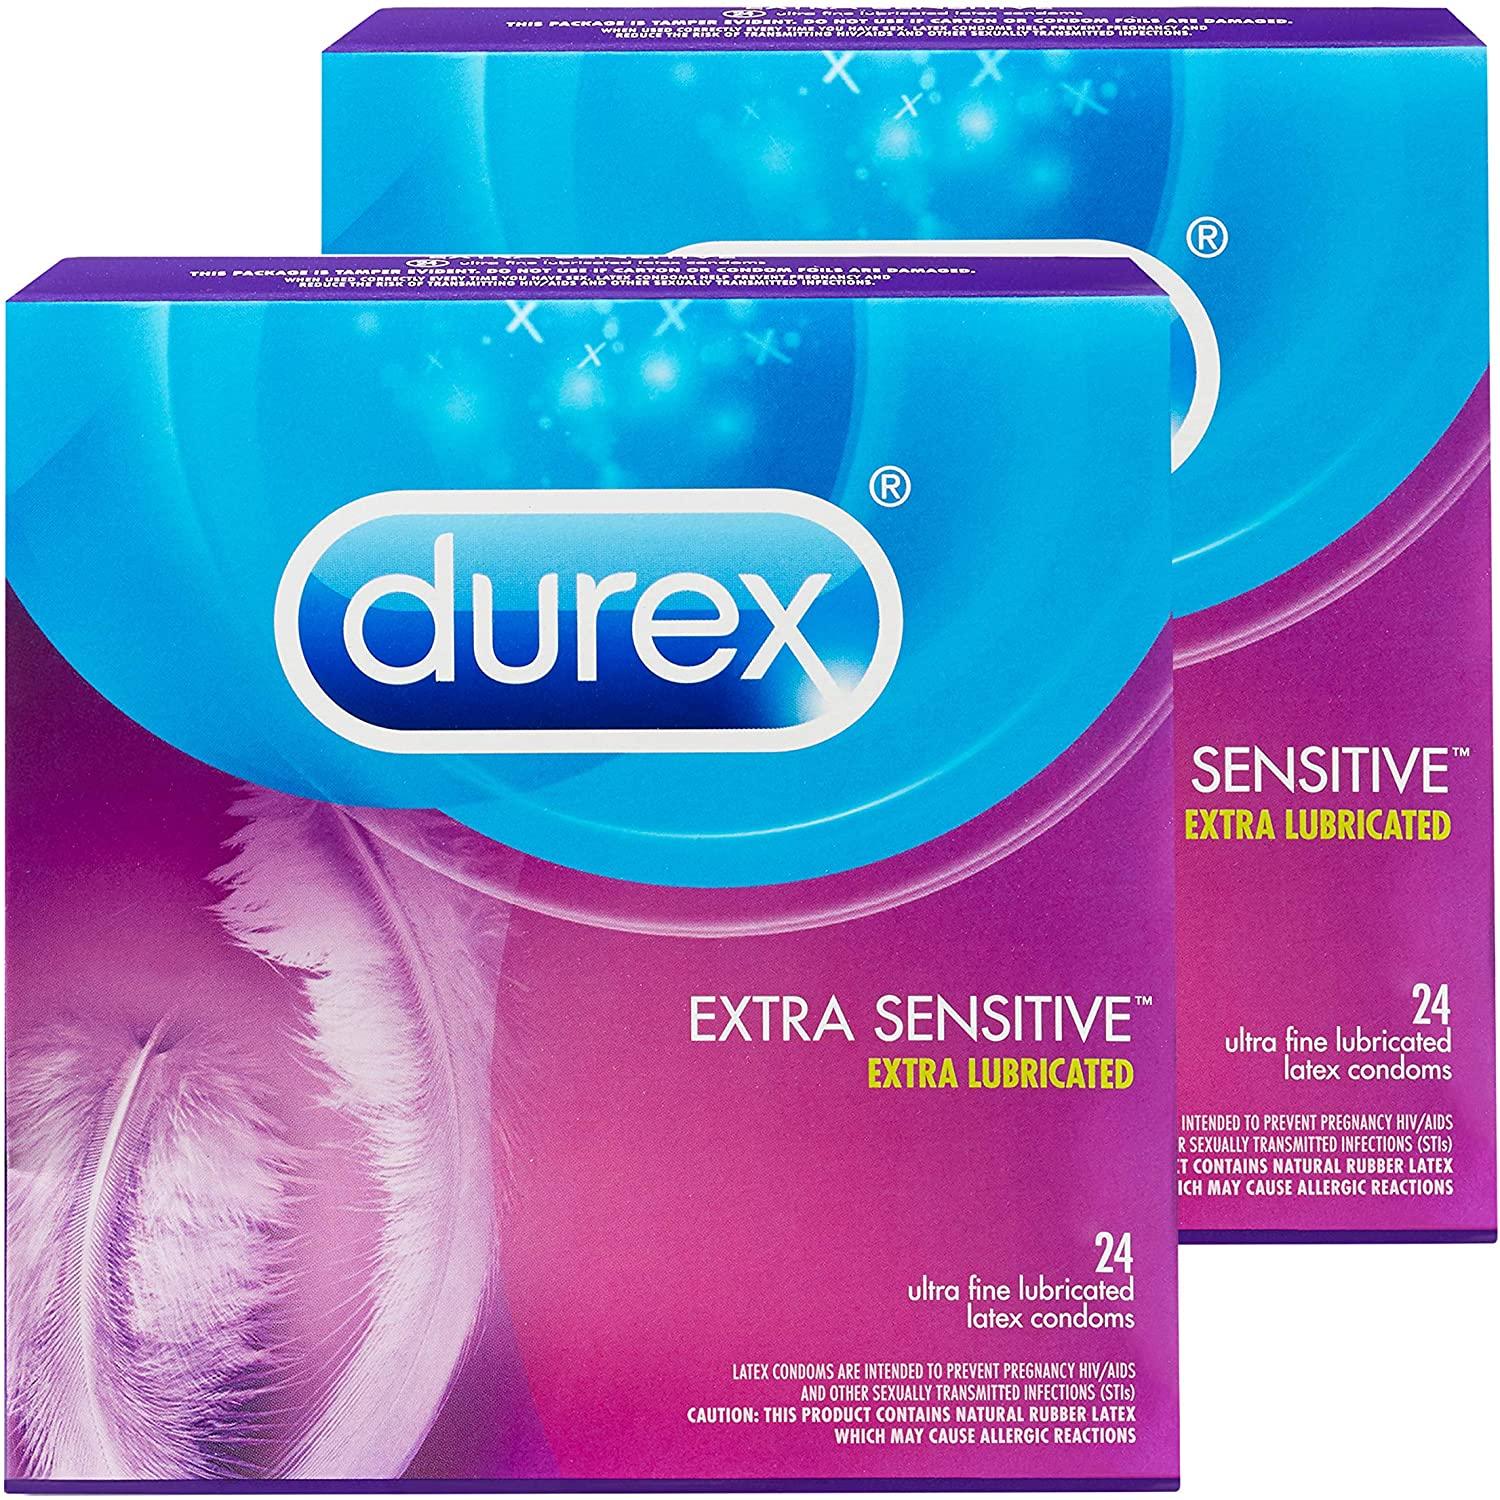 48 Durex Extra Sensitive and Extra Lubricated Condoms for $13.24 Shipped